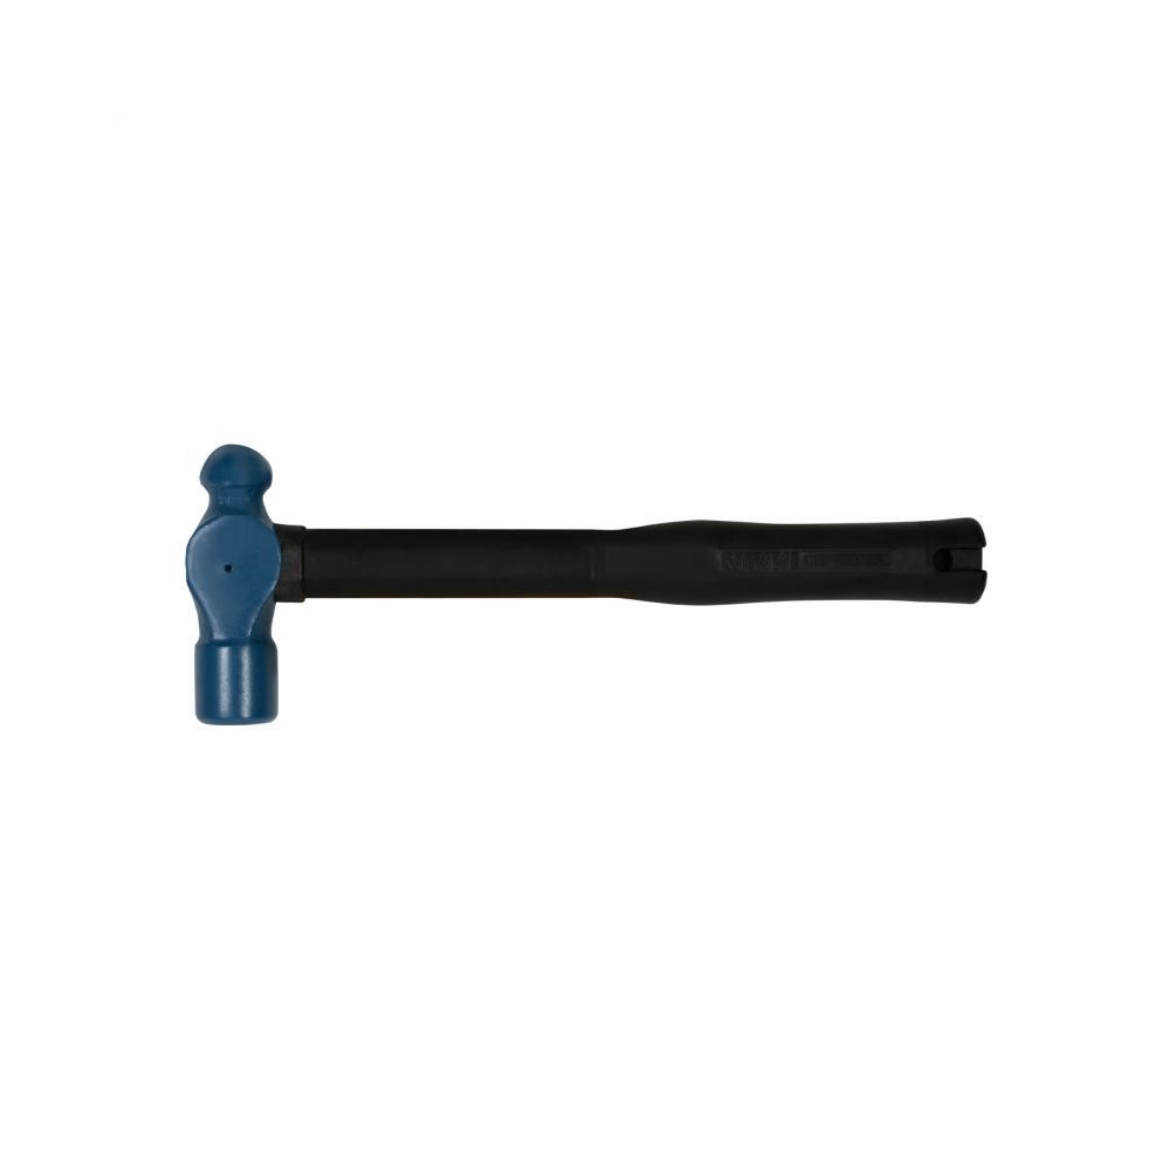 Picture of Ball Pein Hammer 2lb/900g Normalised (soft face), Steel Core Fibreglass Handle 350mm